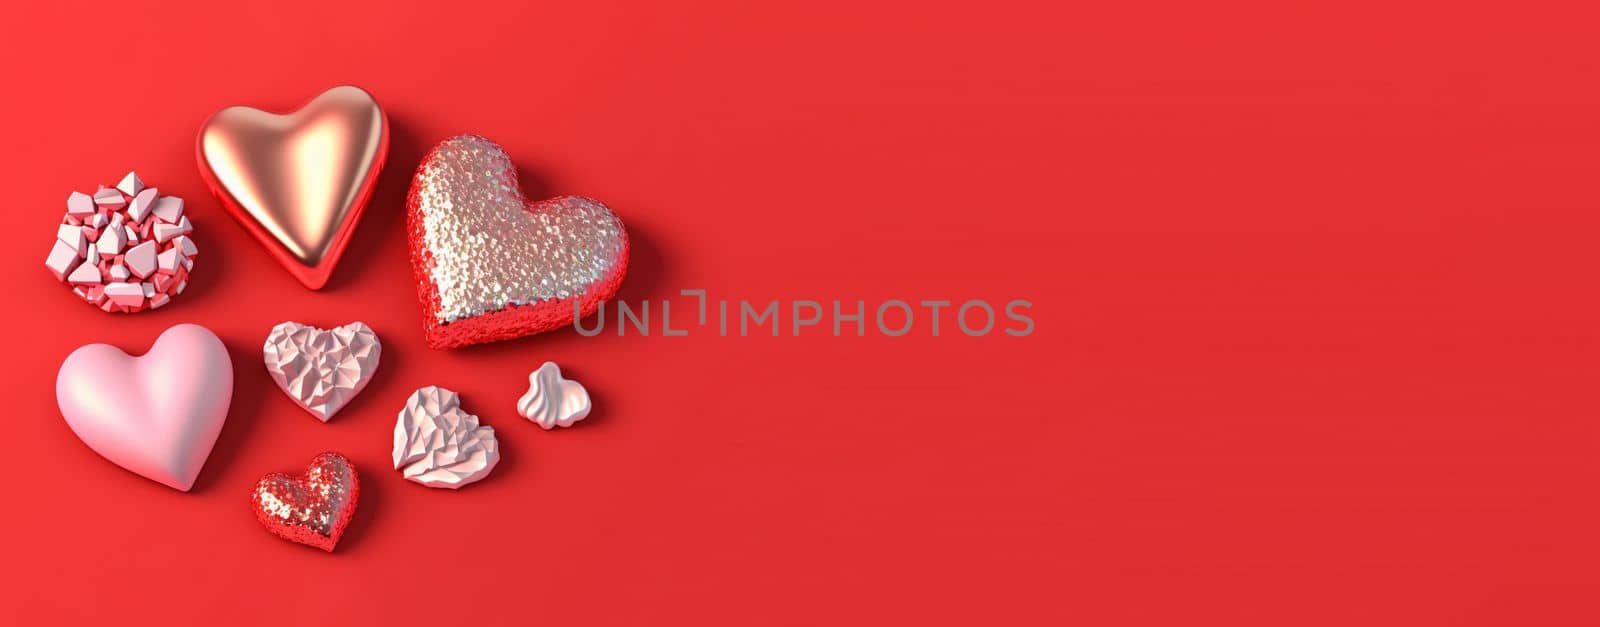 Valentine's Day Banner Background. Sparkling 3D Heart Shape with Diamond and Crystal Illustration by templator